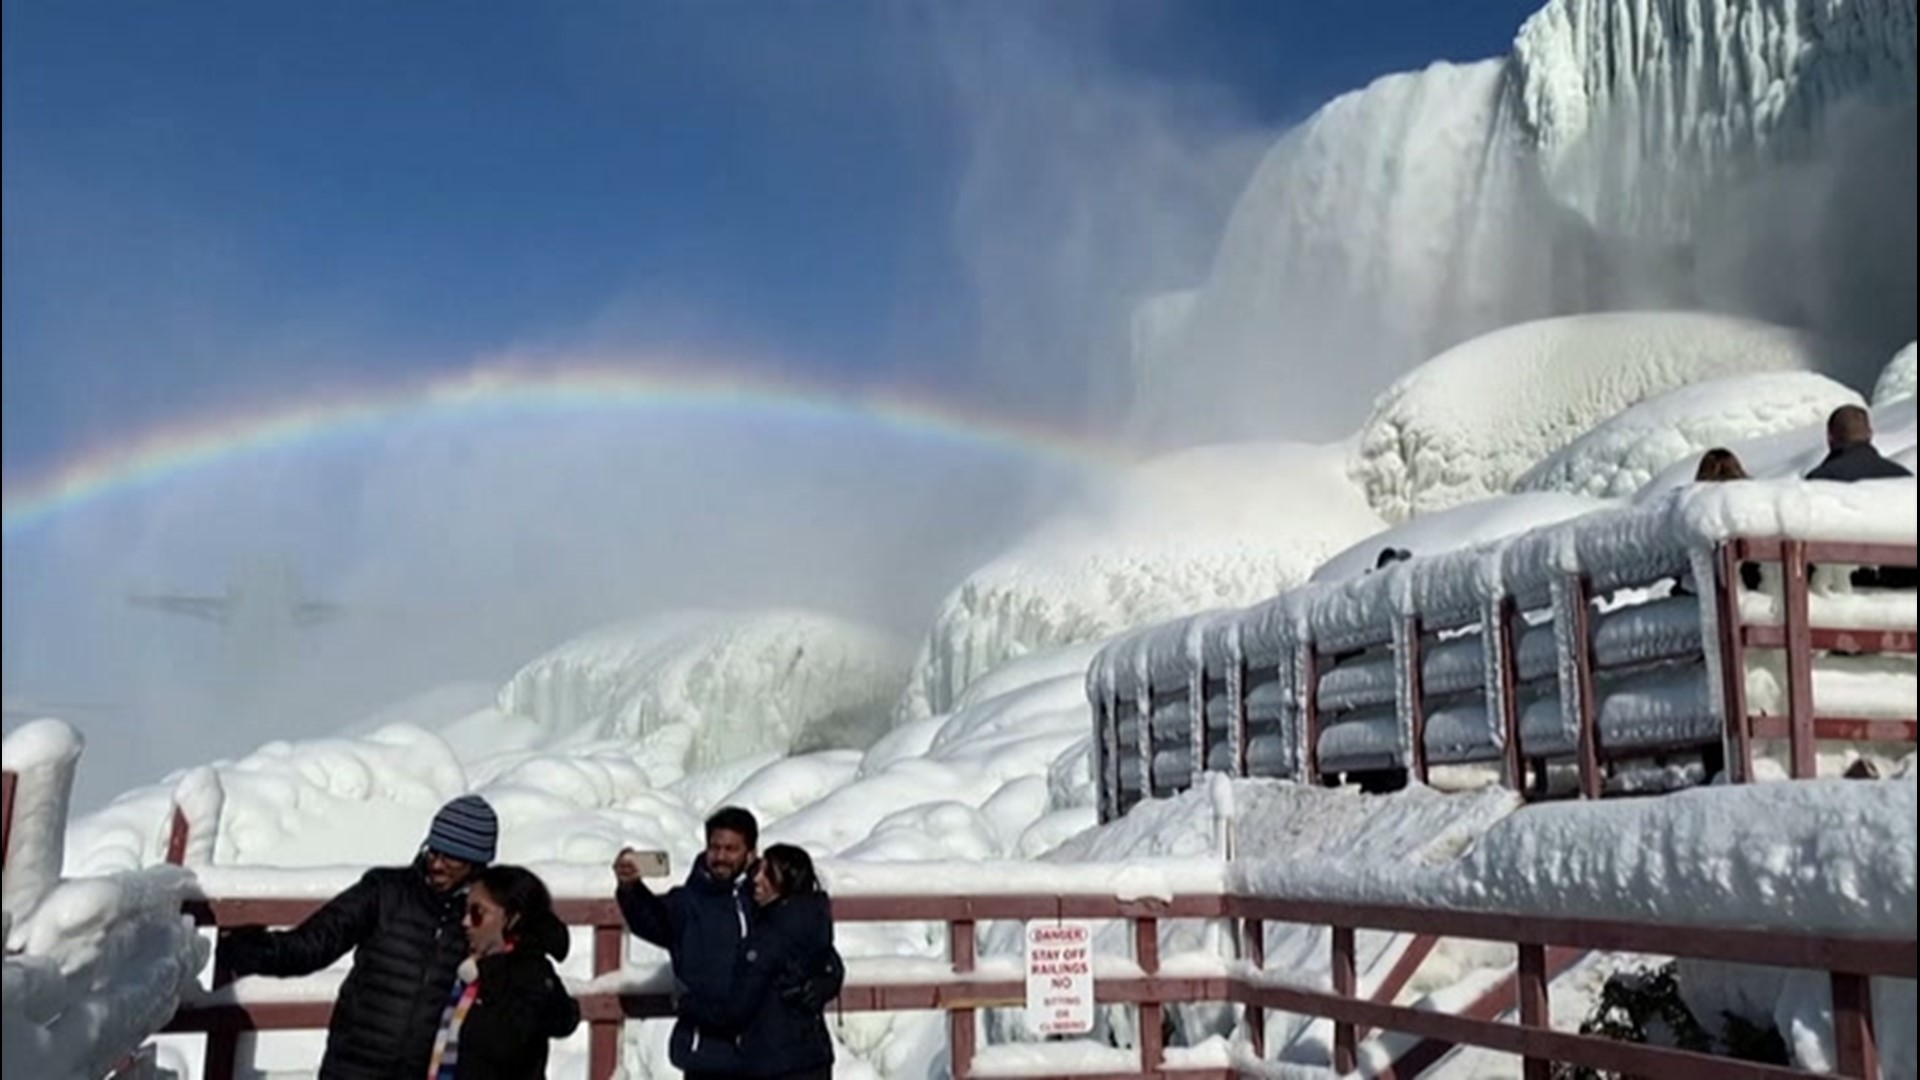 Visitors to the New York side of Niagara Falls were treated to a fun sight as a rainbow formed over the frozen falls on Feb. 21.